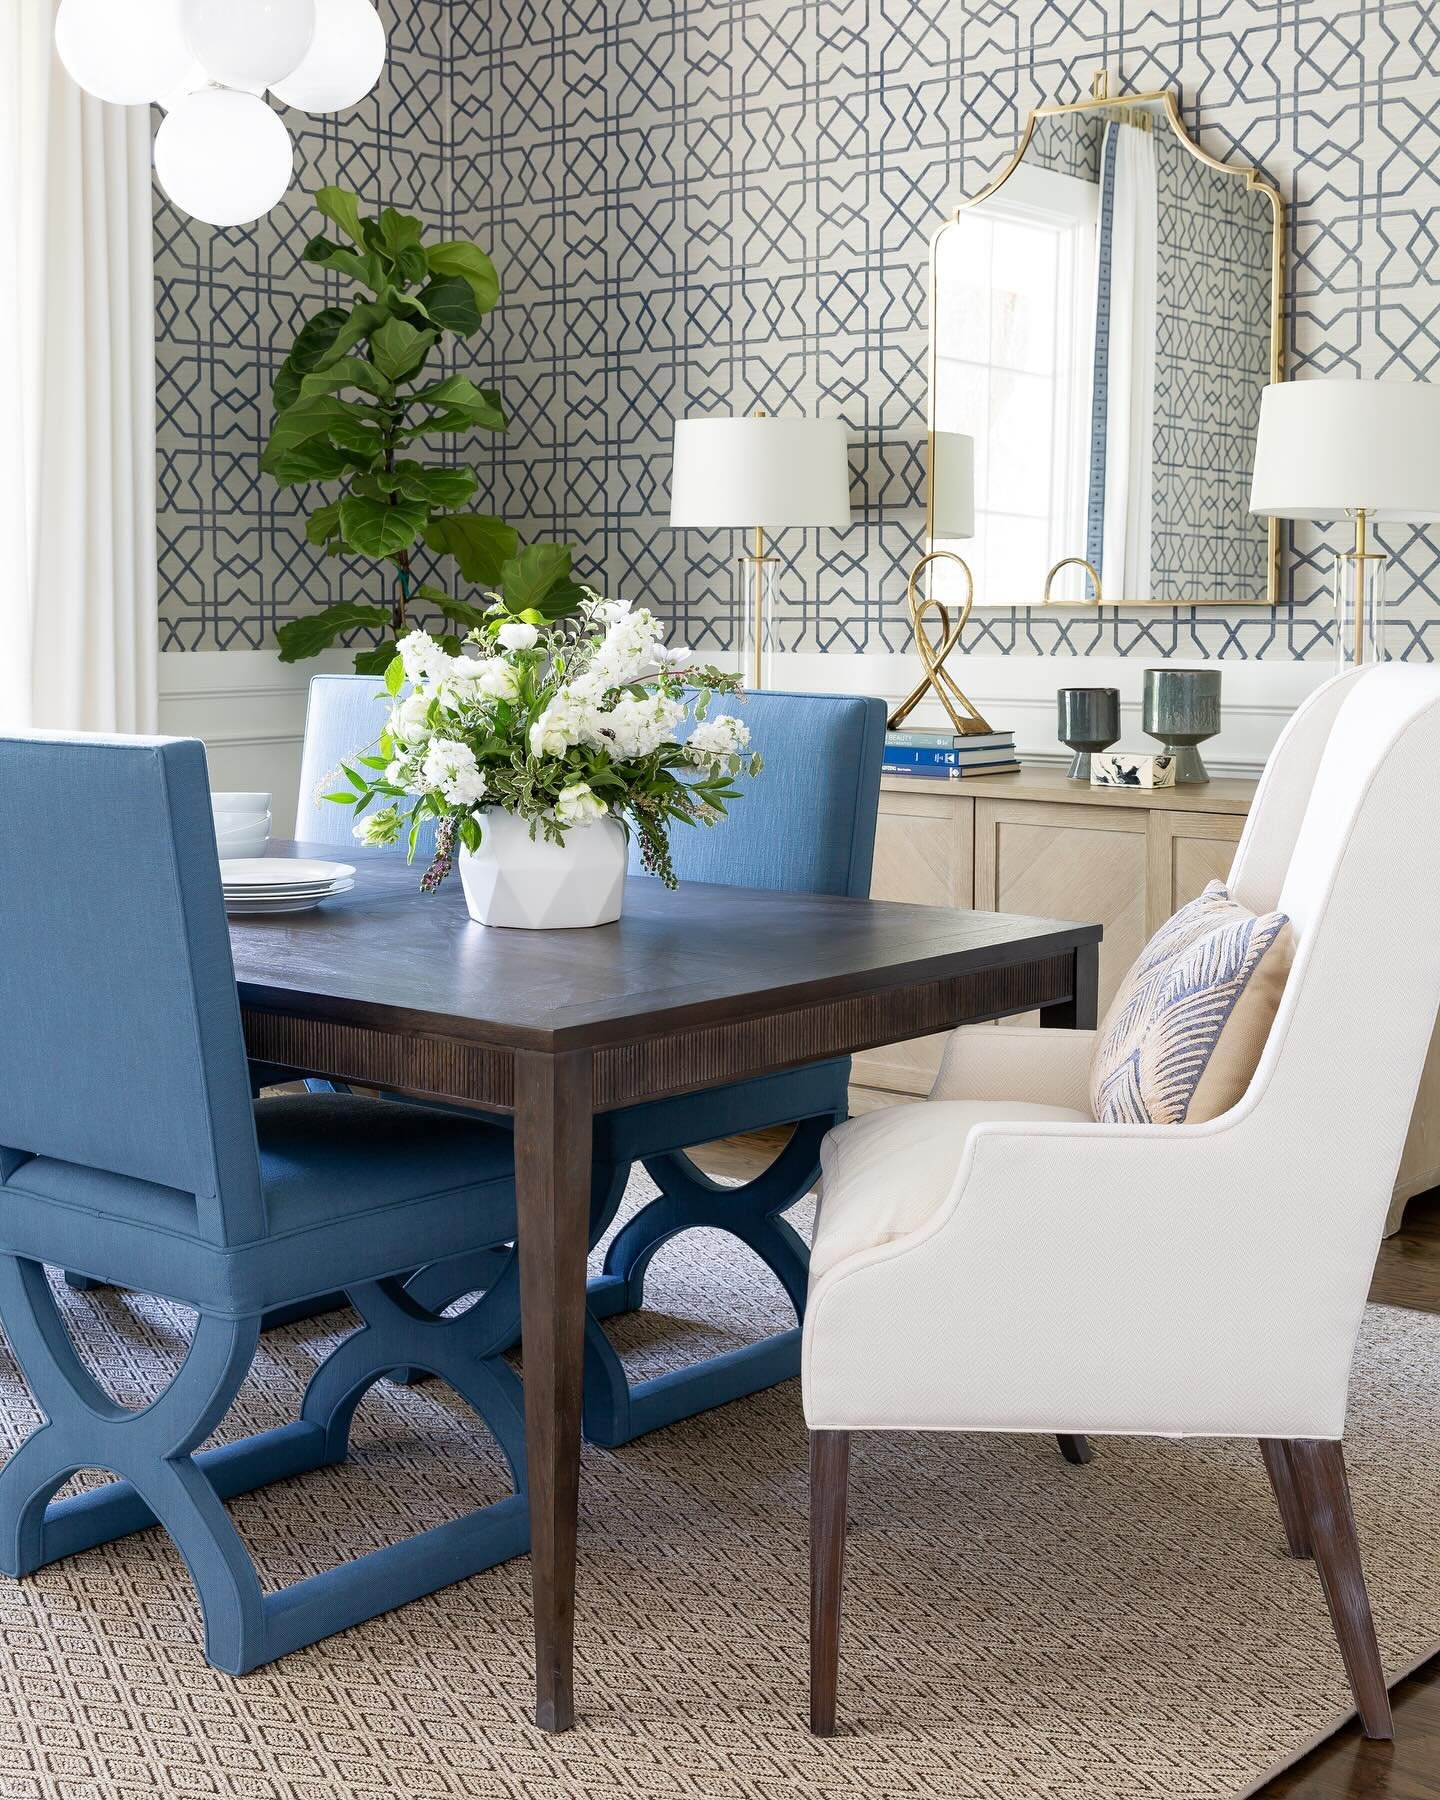 Formal dining rooms are a hot button topic. But I still love them - they are a place to build legos, do puzzles over Christmas break, and play family board games without having to move it all for dinner!

Design: @lark.interiors 
Construction: @rosew